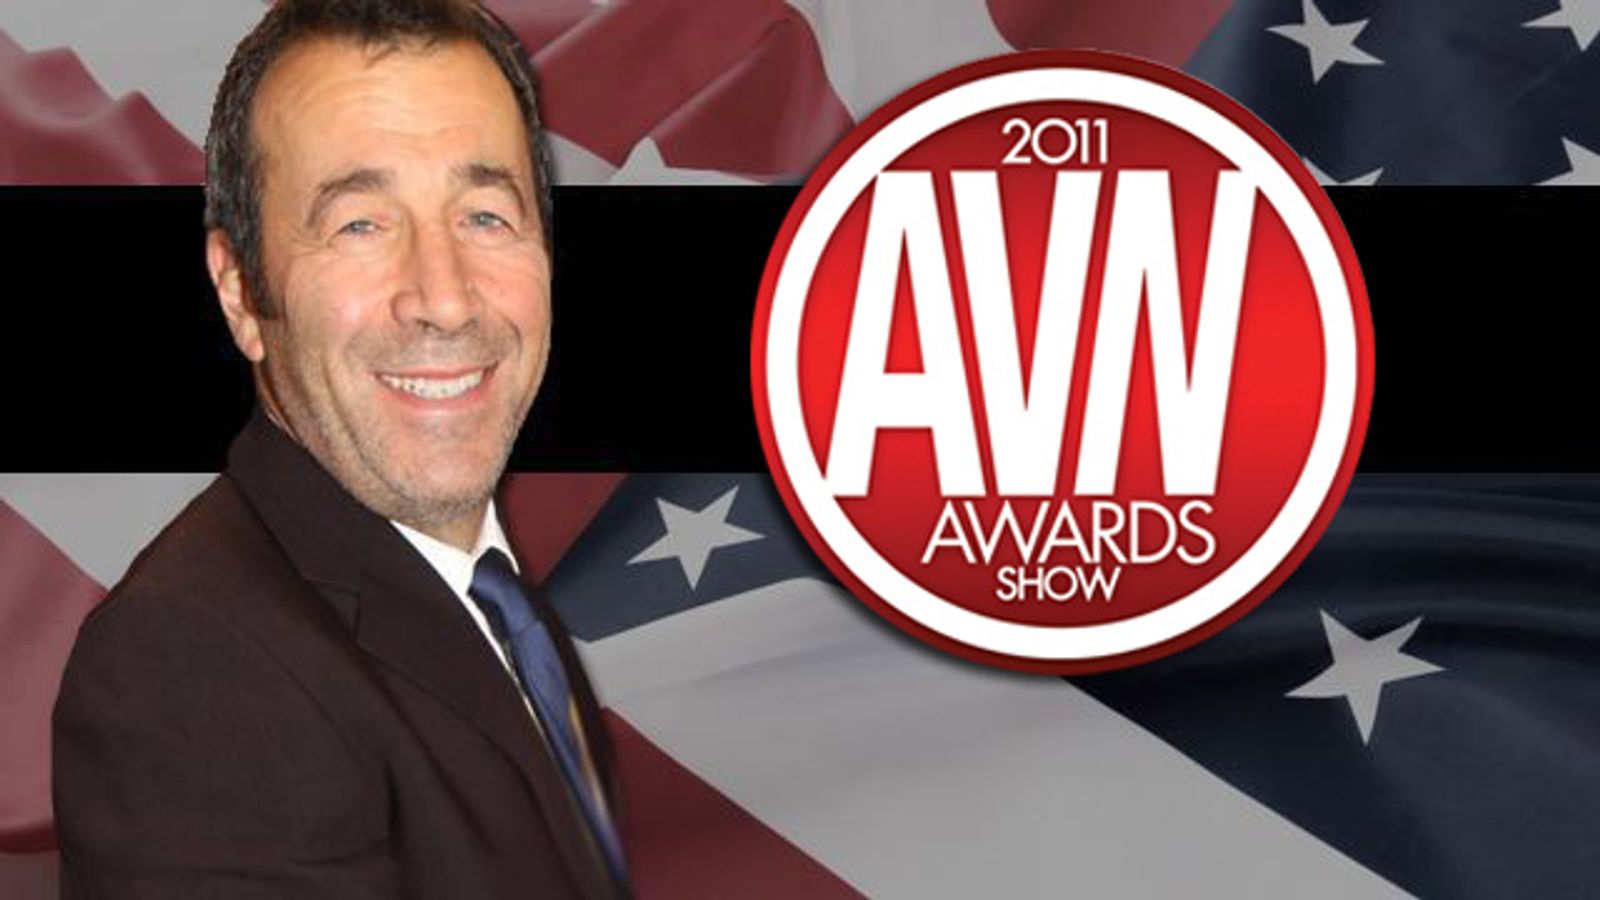 Stagliano Honored with Sturman Award at 2011 AVN Awards